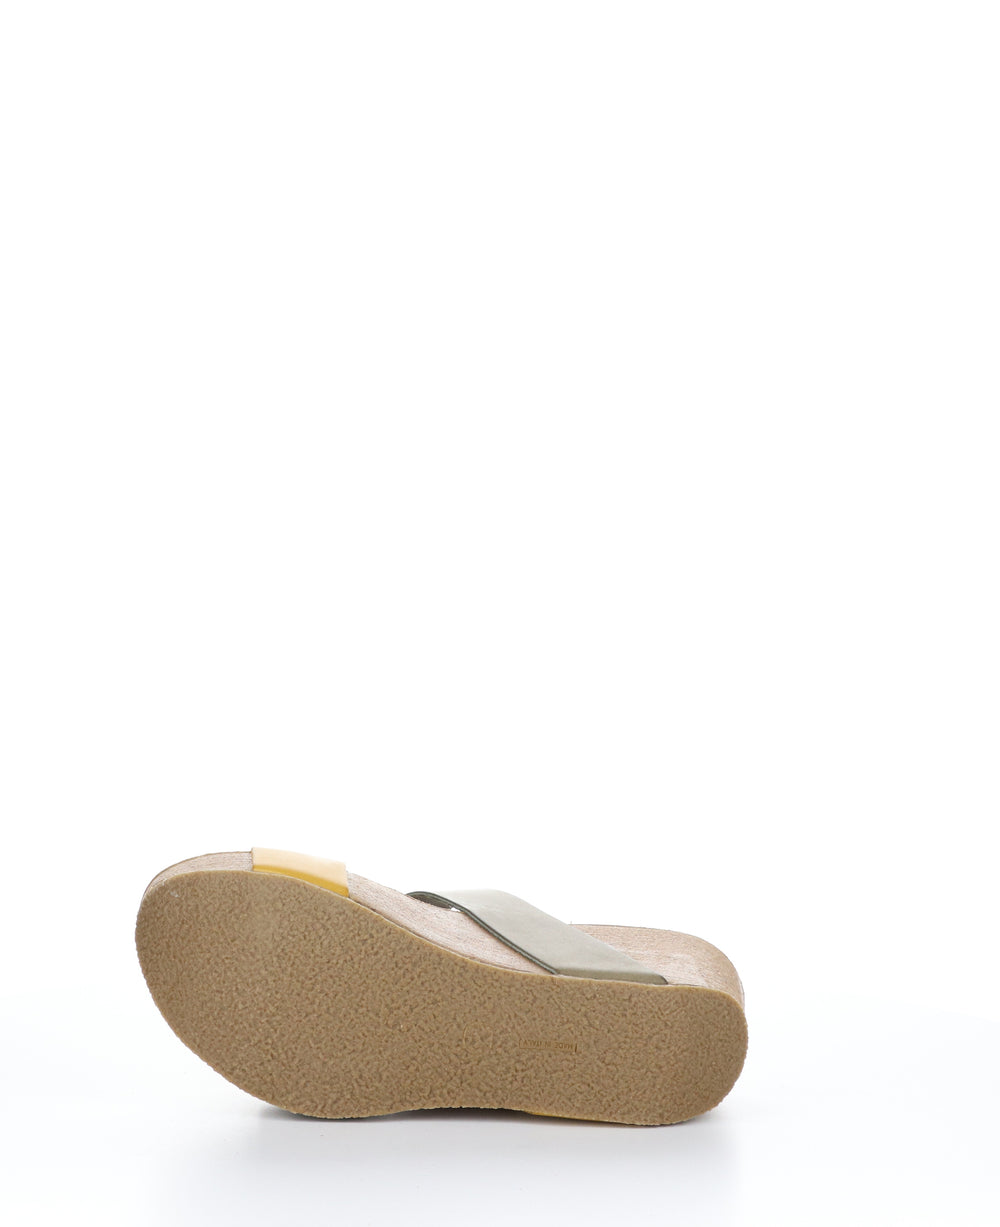 LAWT FANGO TAUPE/YELLOW Wedge Sandals